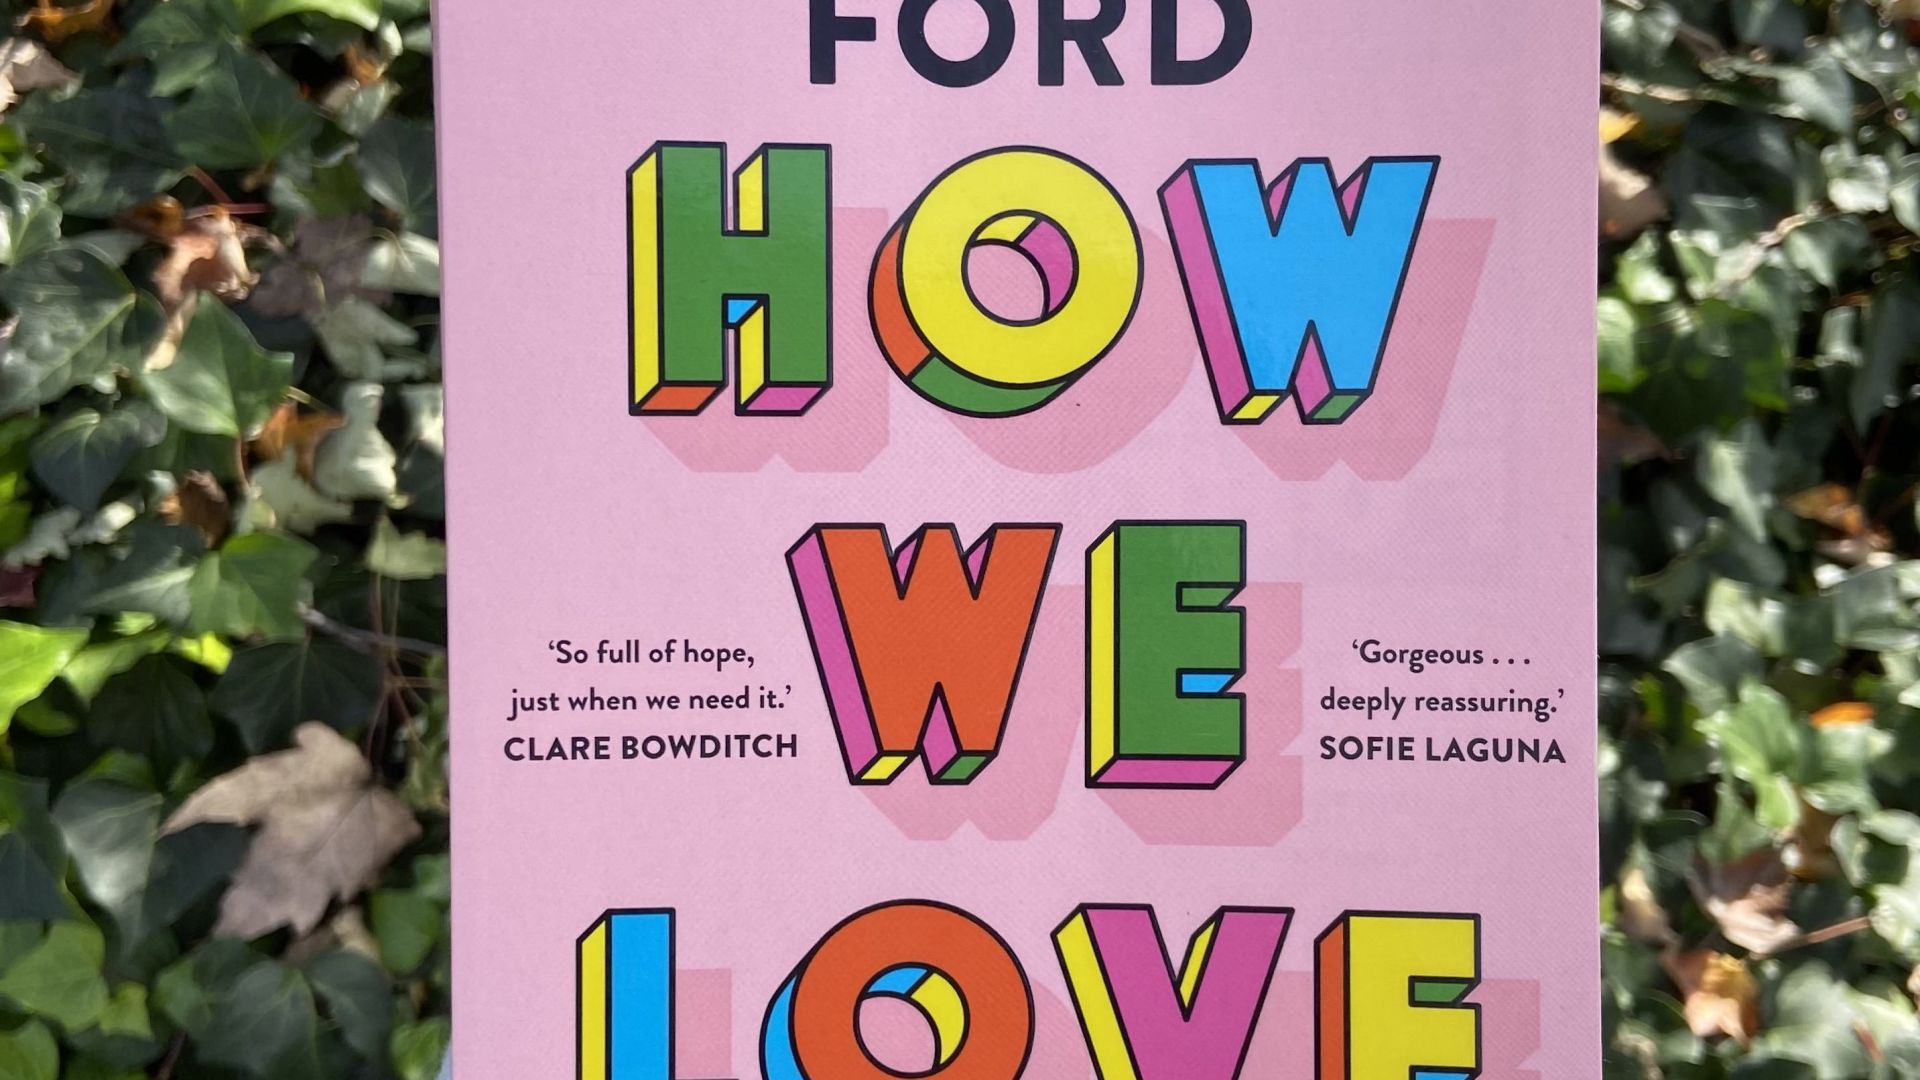 Review of Clementine Ford's 'How We Love: Notes on a Life'